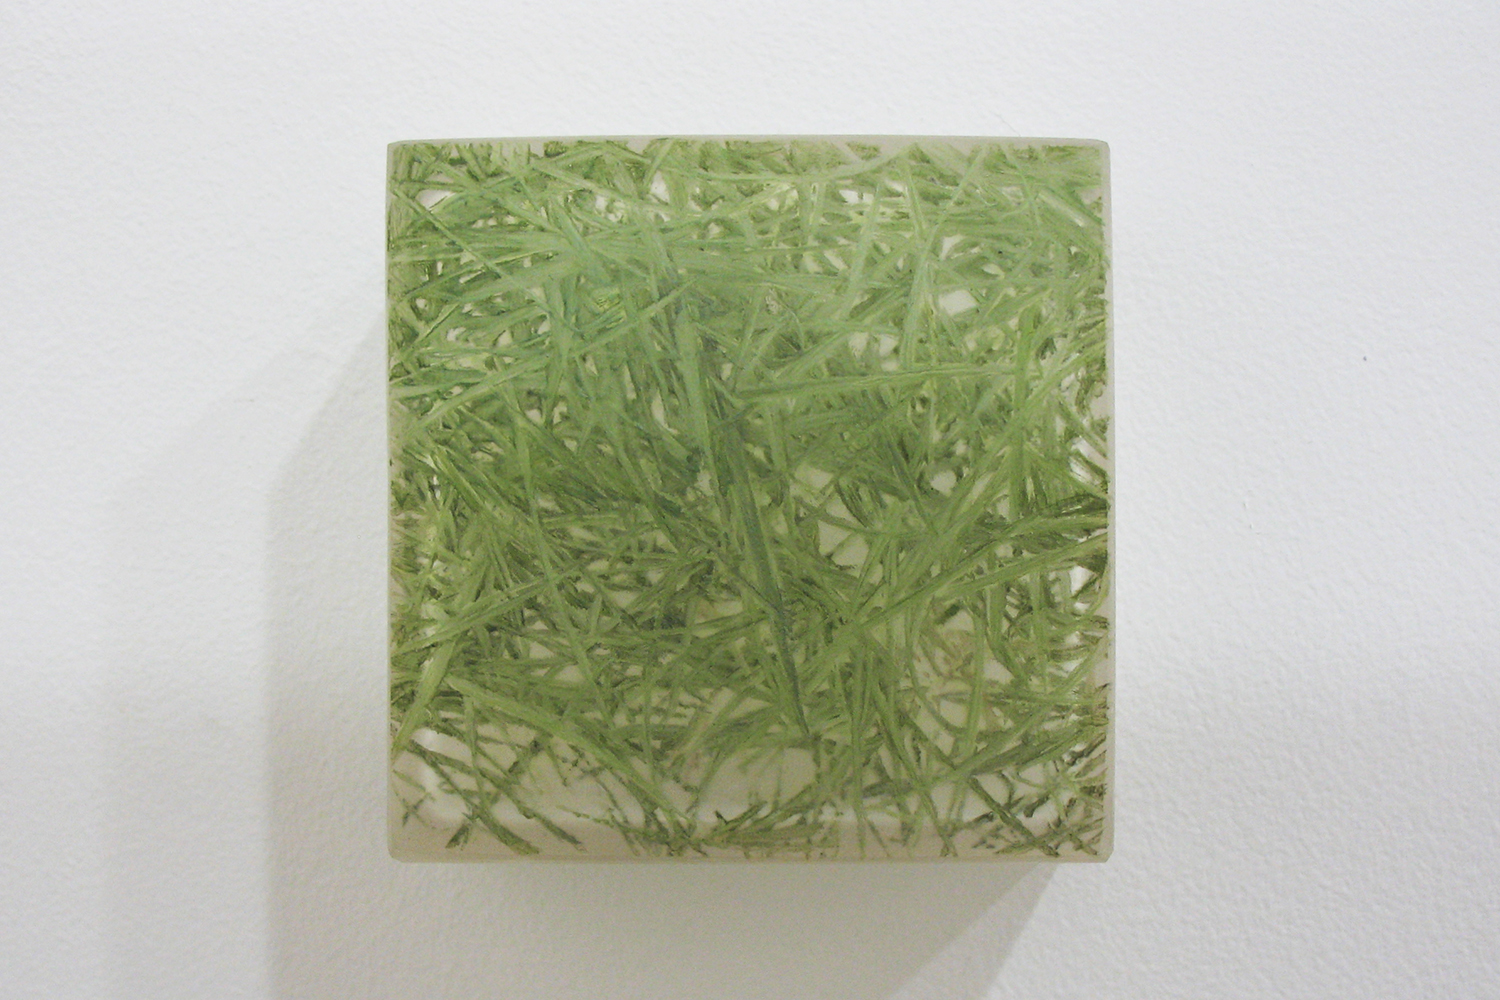 Photo-painting 草上のかおり｜Scent on the grass ｜7.5 x 7.5 x 3 cm｜Oil on FRP, mixed media｜ 2009<br>¥50,000 - 200,000